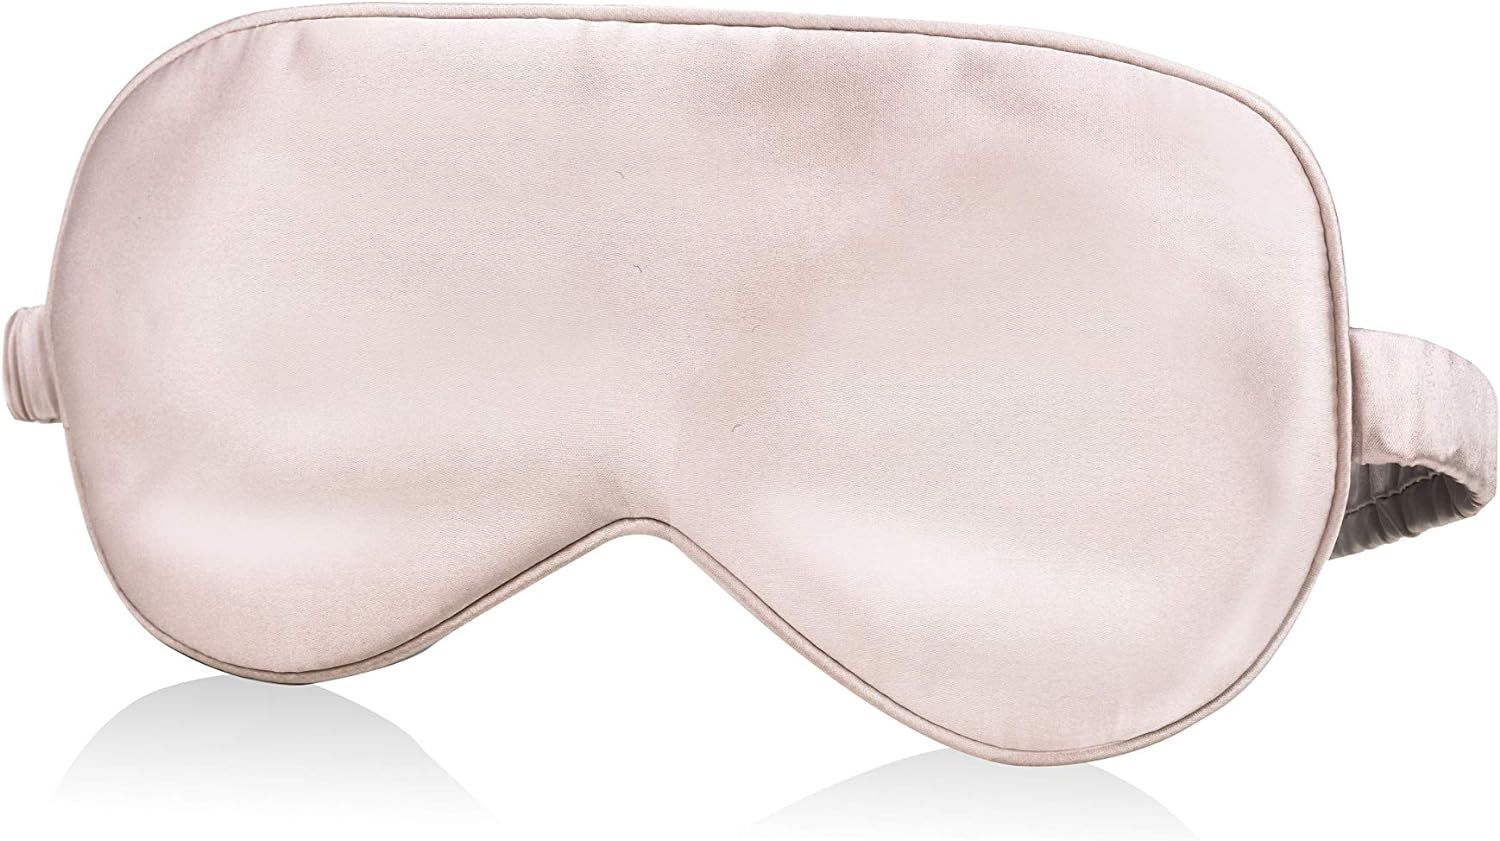 Comfy Party Beauty Silk Sleep Mask, Pink |Anti-Aging with Hyaluronic Acid Blended |Ultra Soft & Comf | Amazon (US)